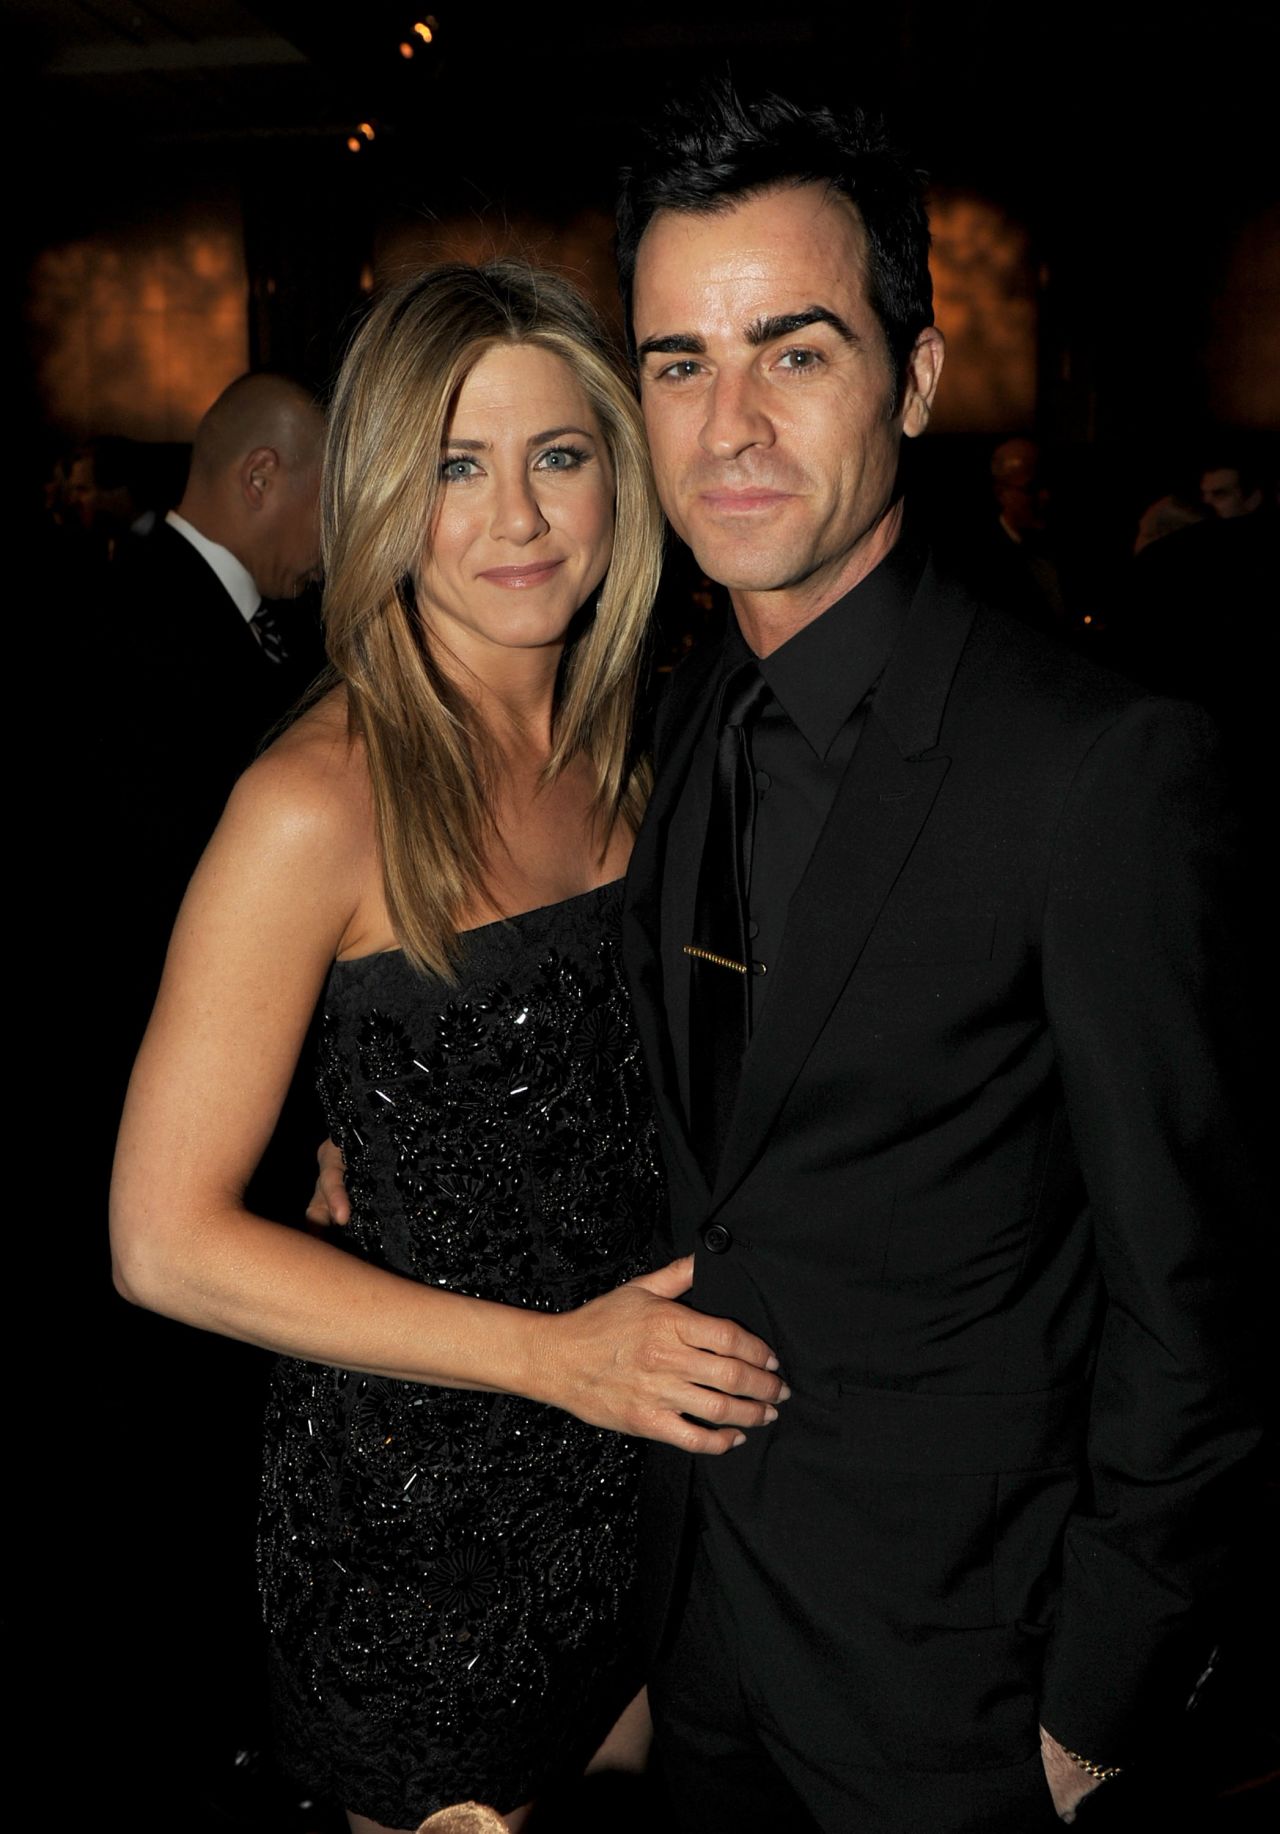 Jennifer Aniston hasn't always been lucky in love, but she may have finally found her prince in<a href="http://www.cnn.com/2012/08/12/showbiz/aniston-engaged/index.html?hpt=en_c1" target="_blank"> fiancé</a> Justin Theroux. Here's a look back at some of Jen's men: